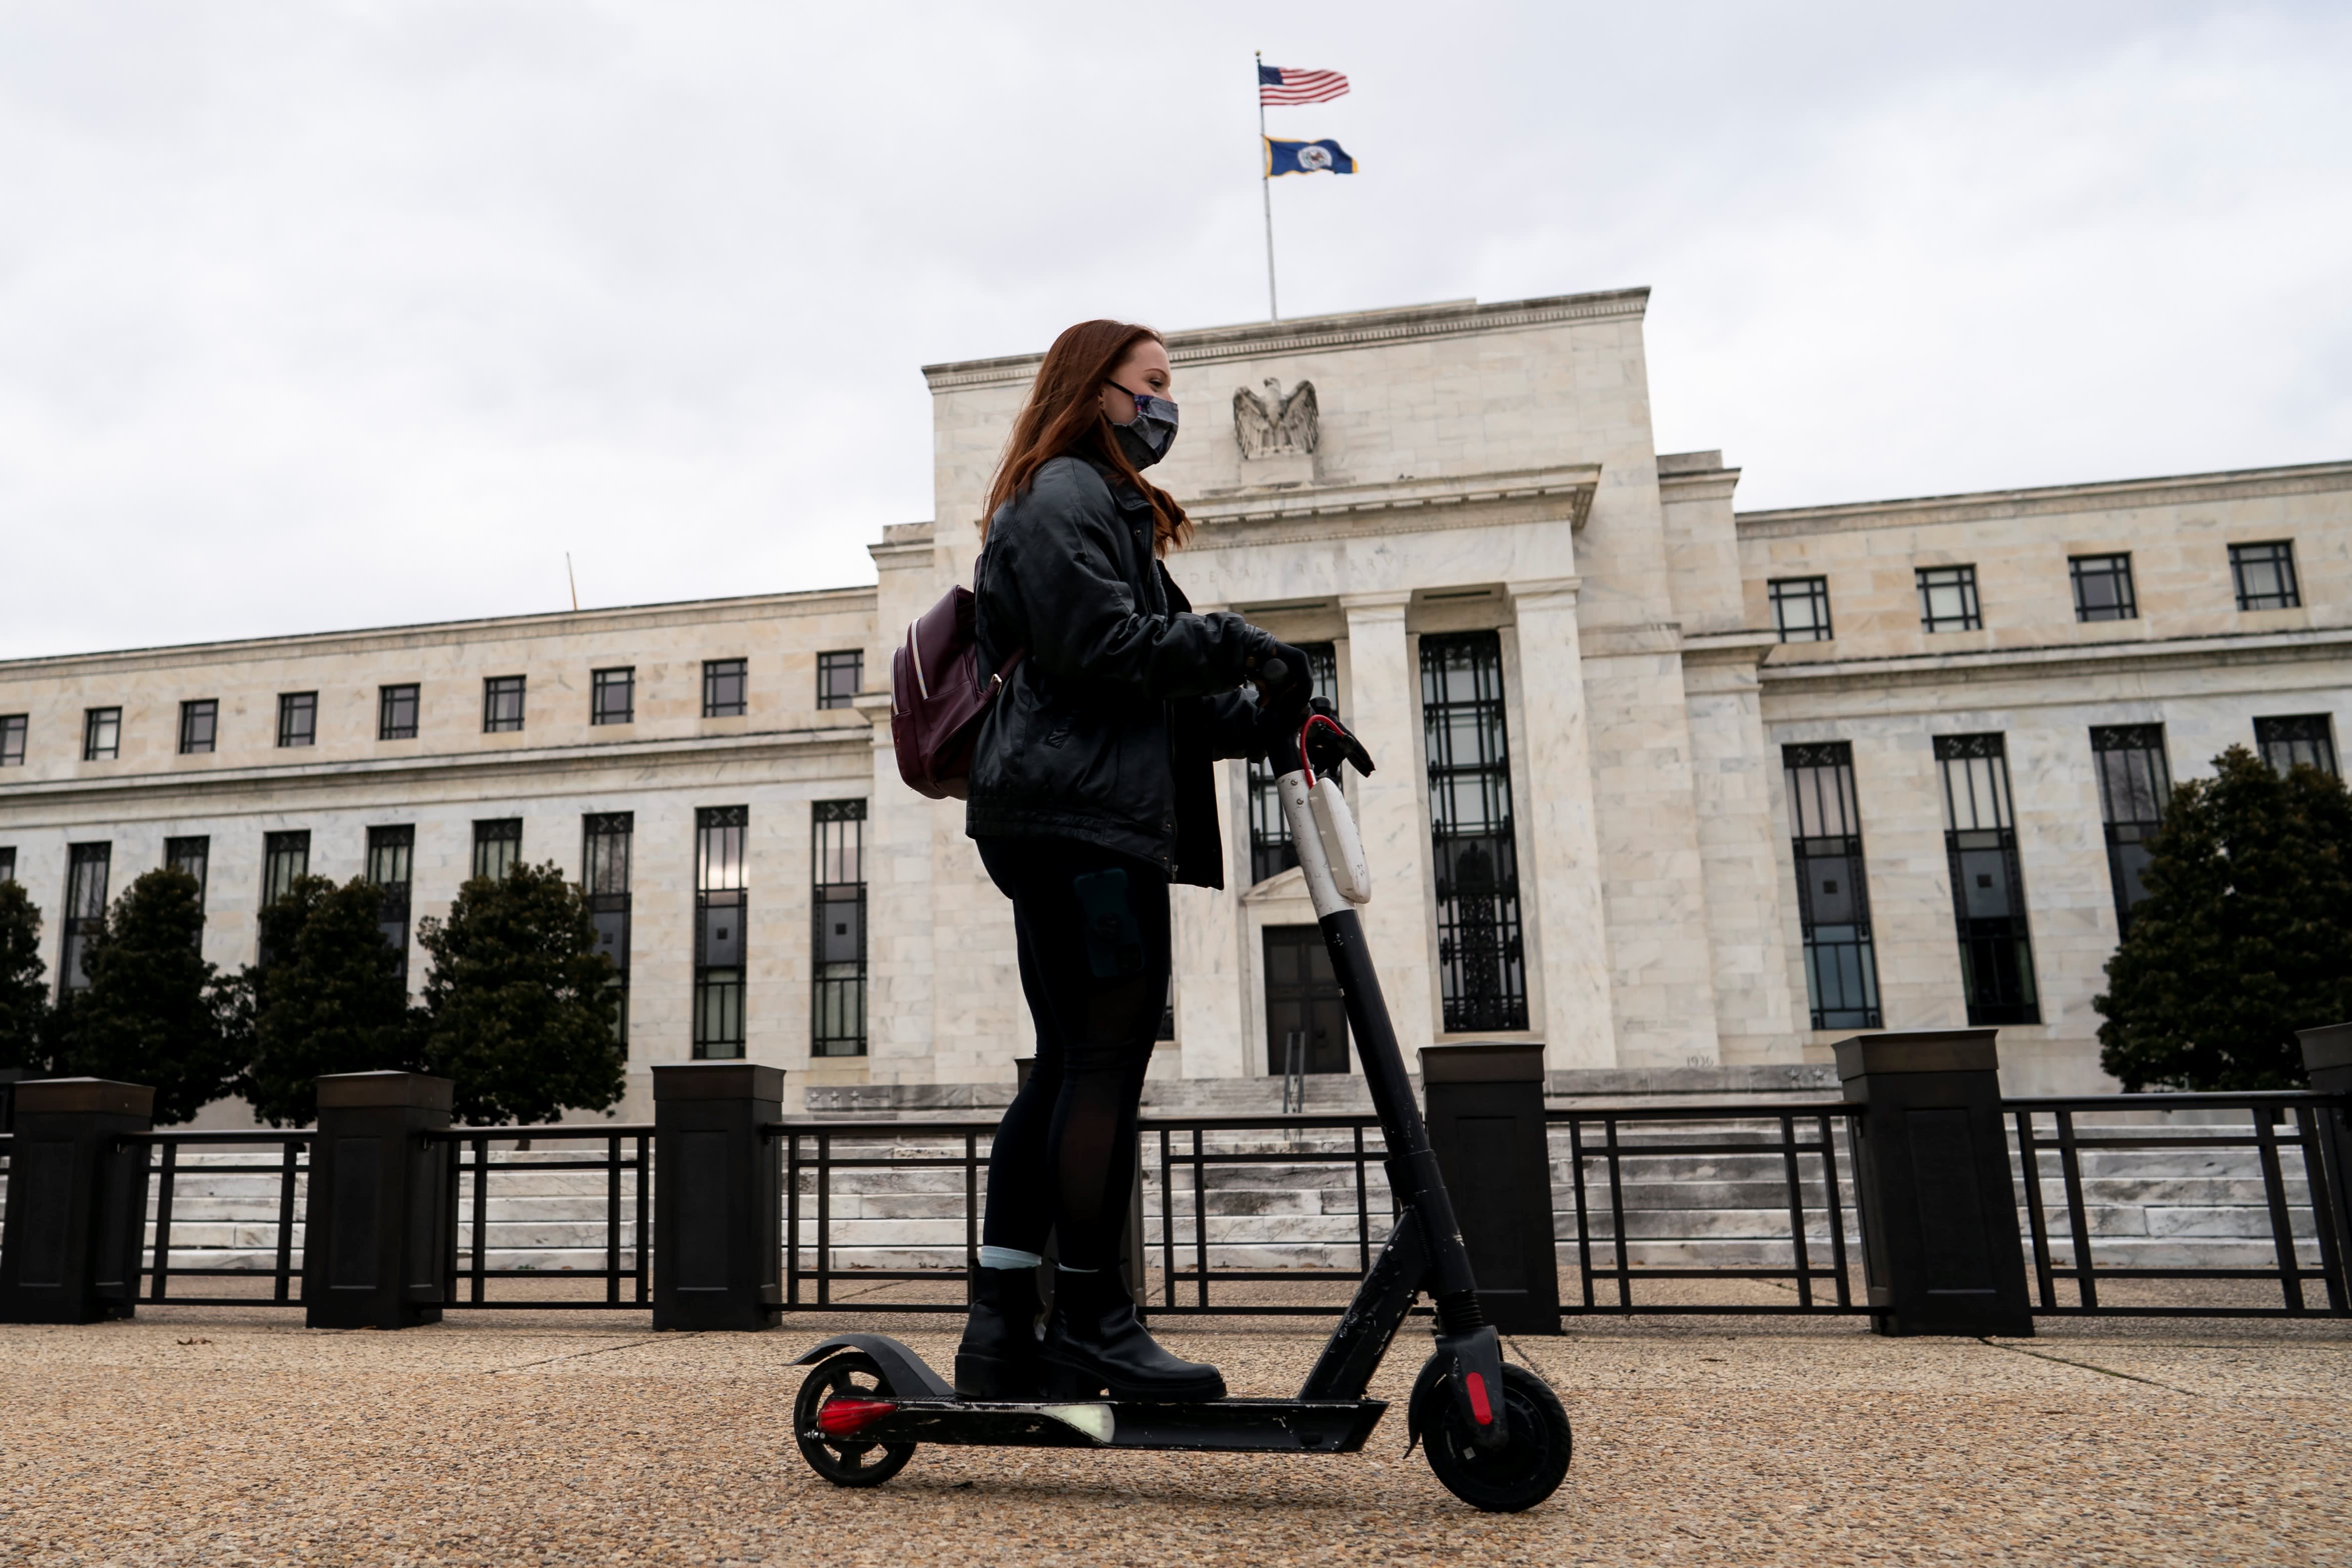 The Federal Reserve is moving forward in its efforts to develop its own digital currency, announcing Thursday it will release a research paper this su